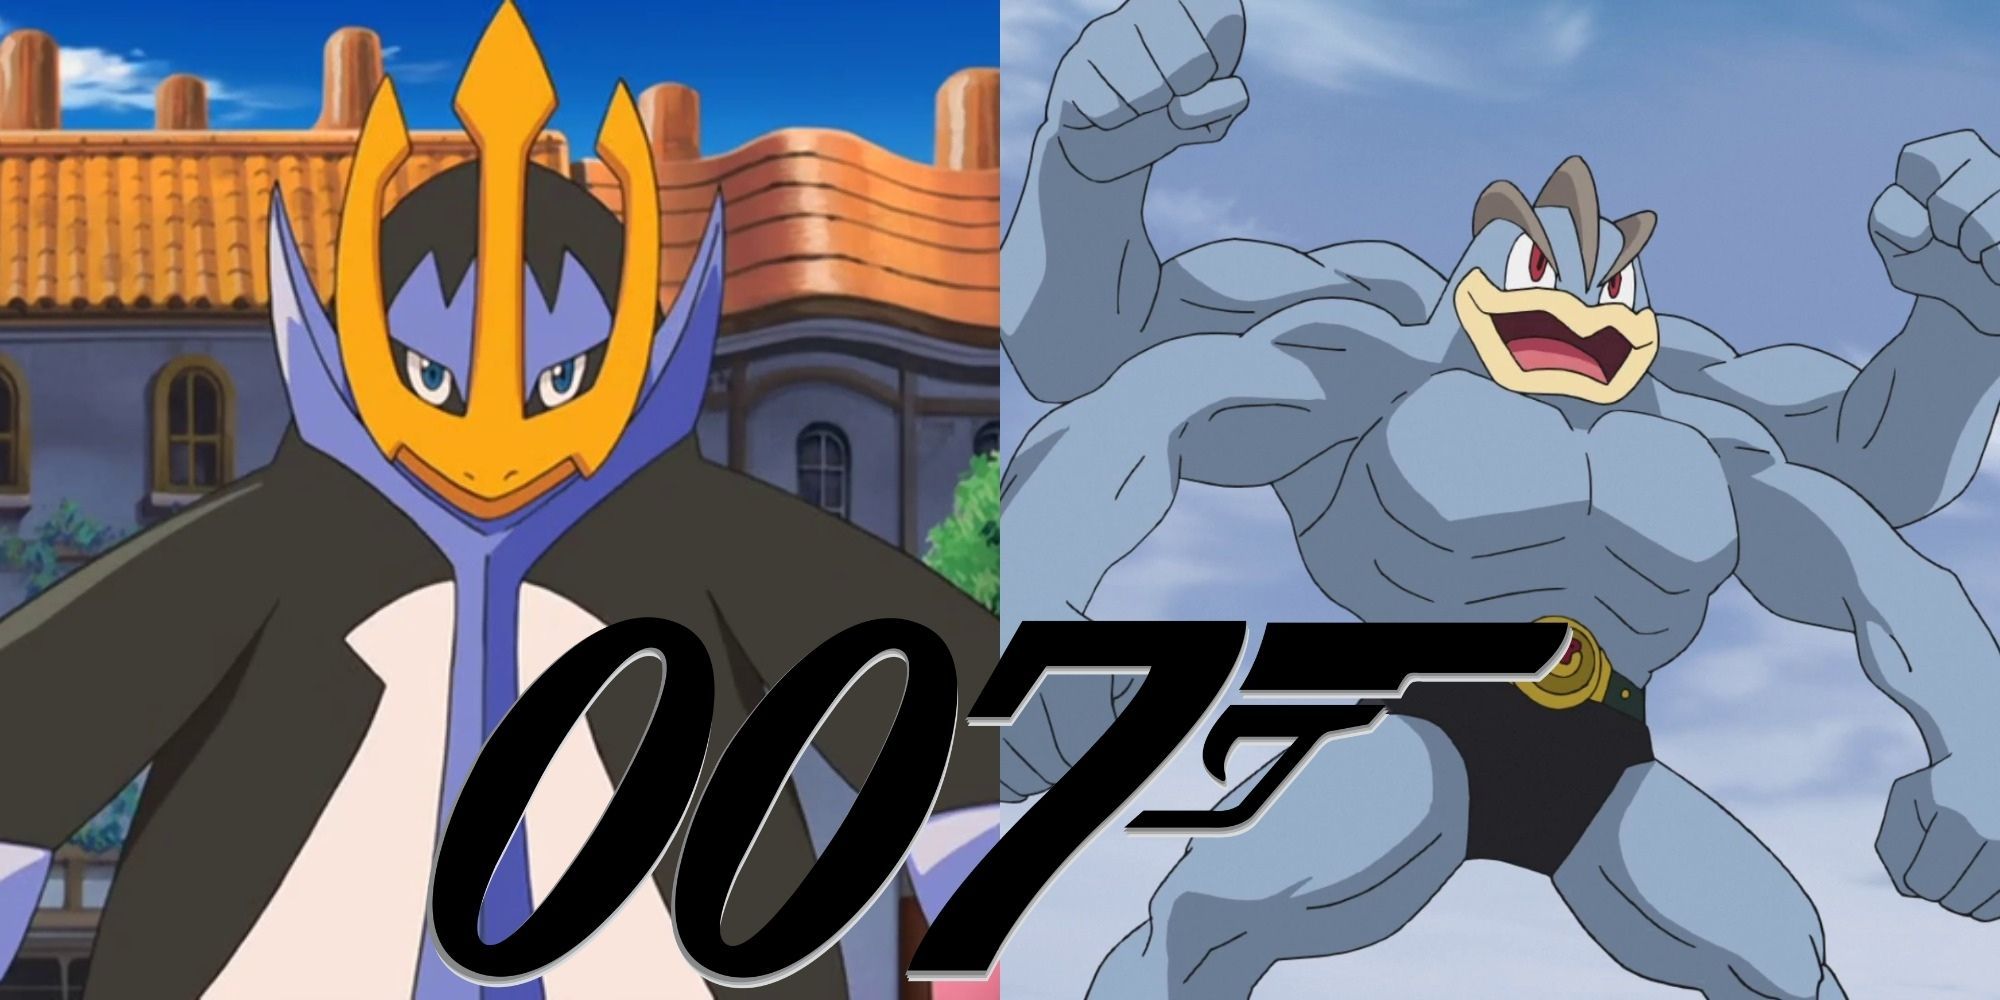 Split image showing Empoleon and Machamp, and the 007 logo